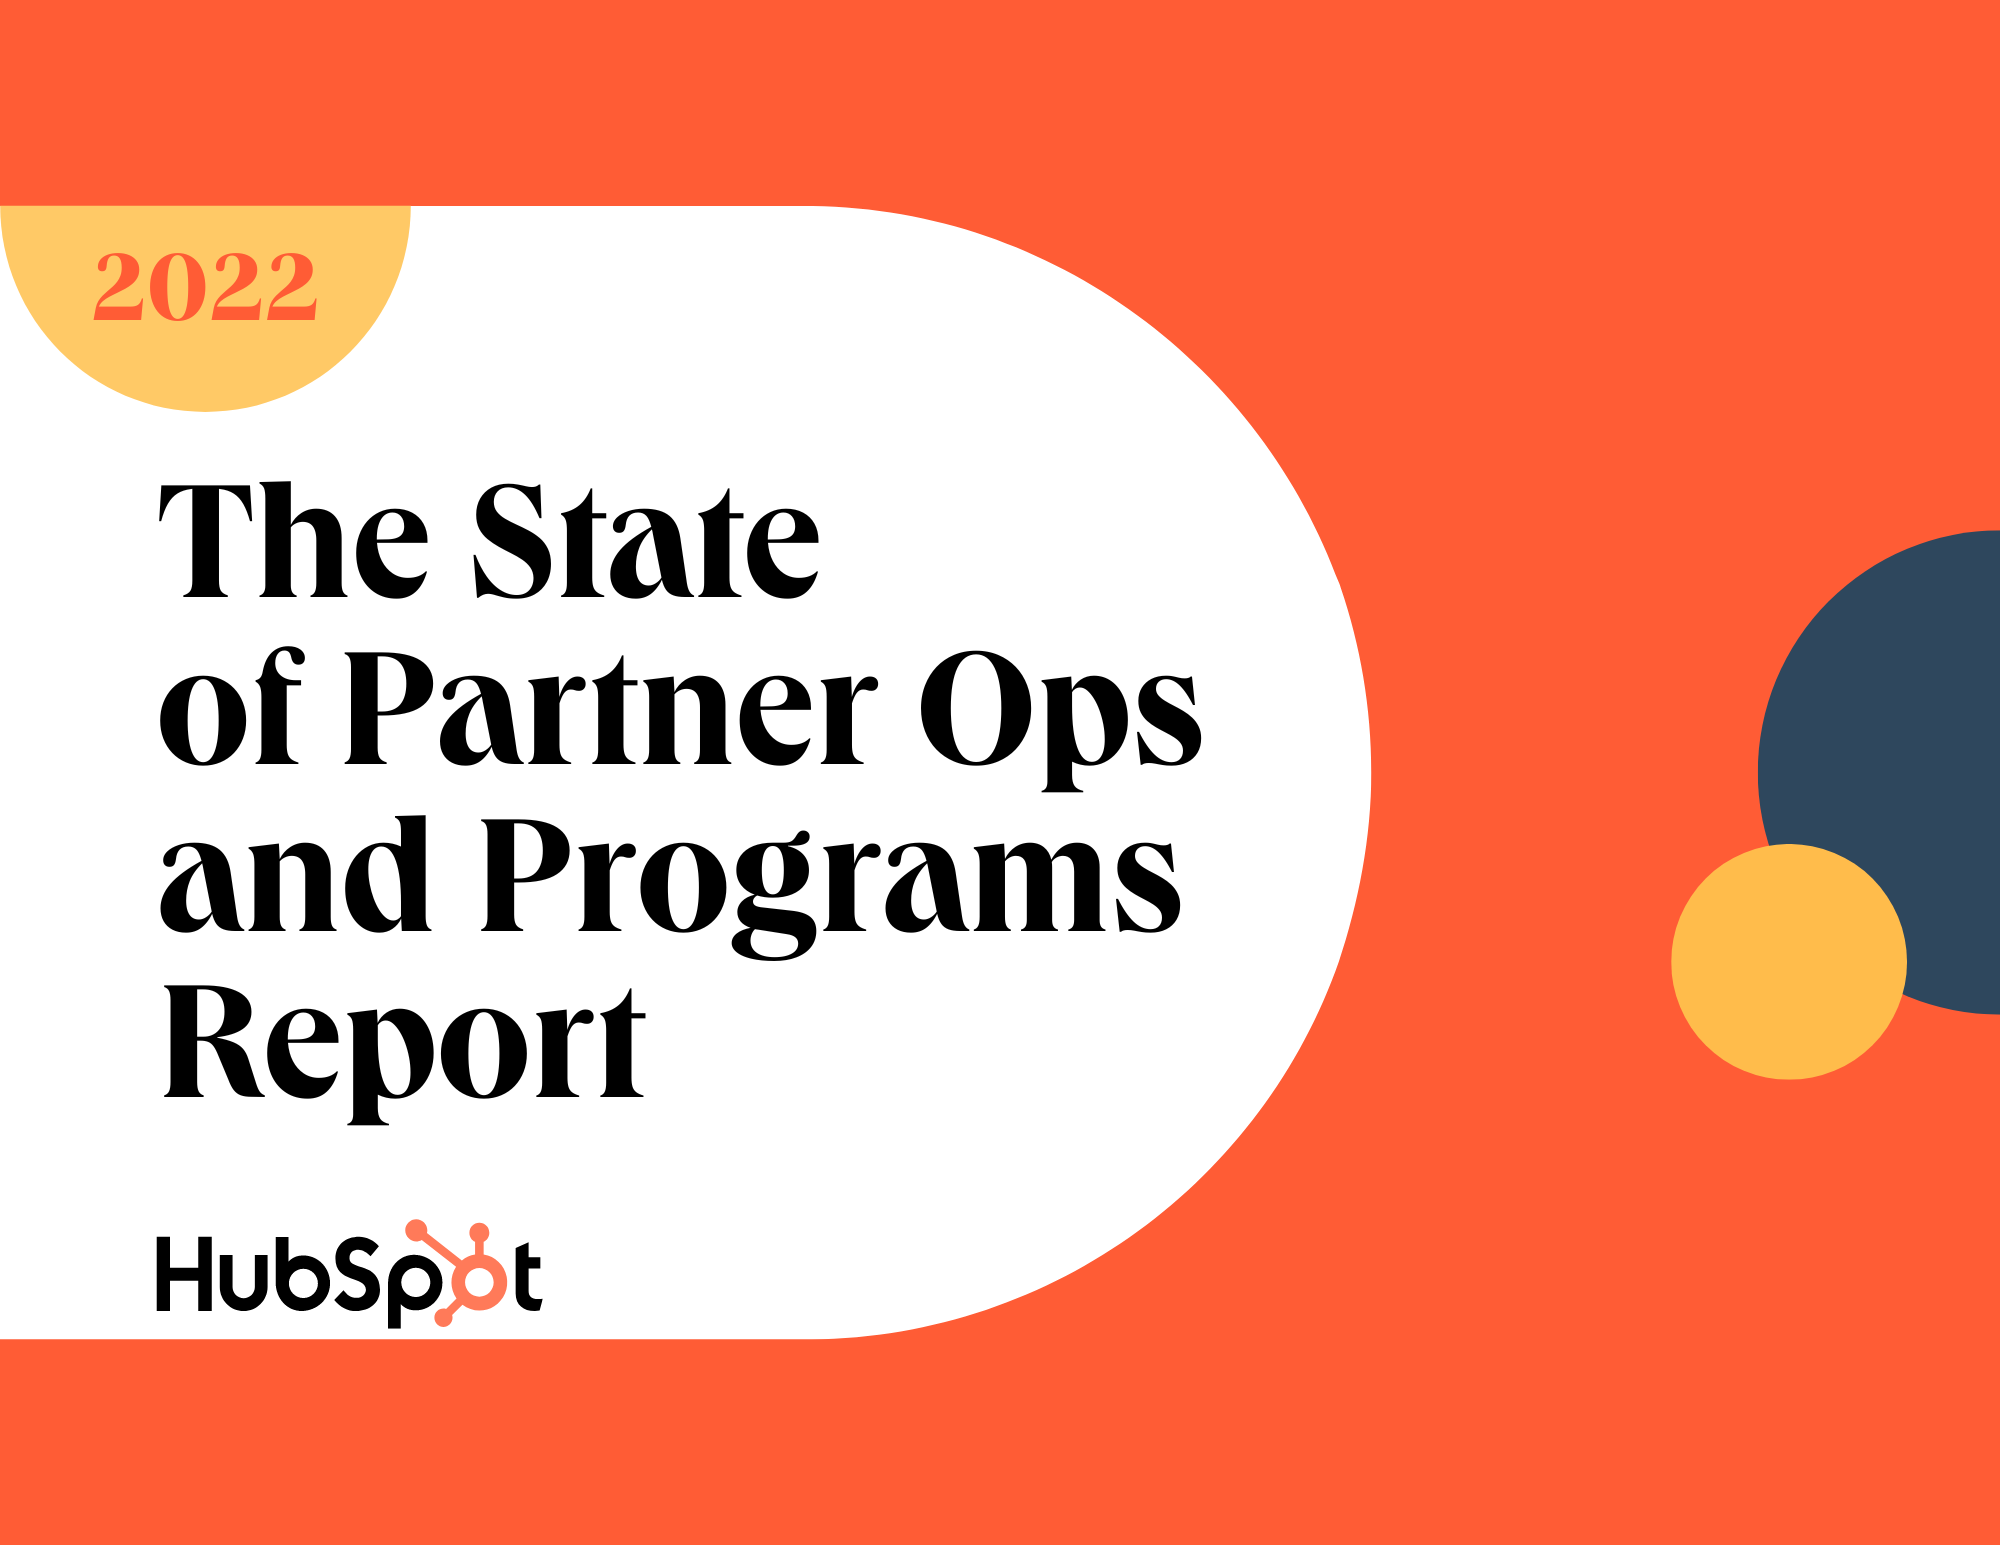 HubSpot Releases The State of Partner Ops and Programs Report, Detailing the Business Impact of Partner Ecosystems